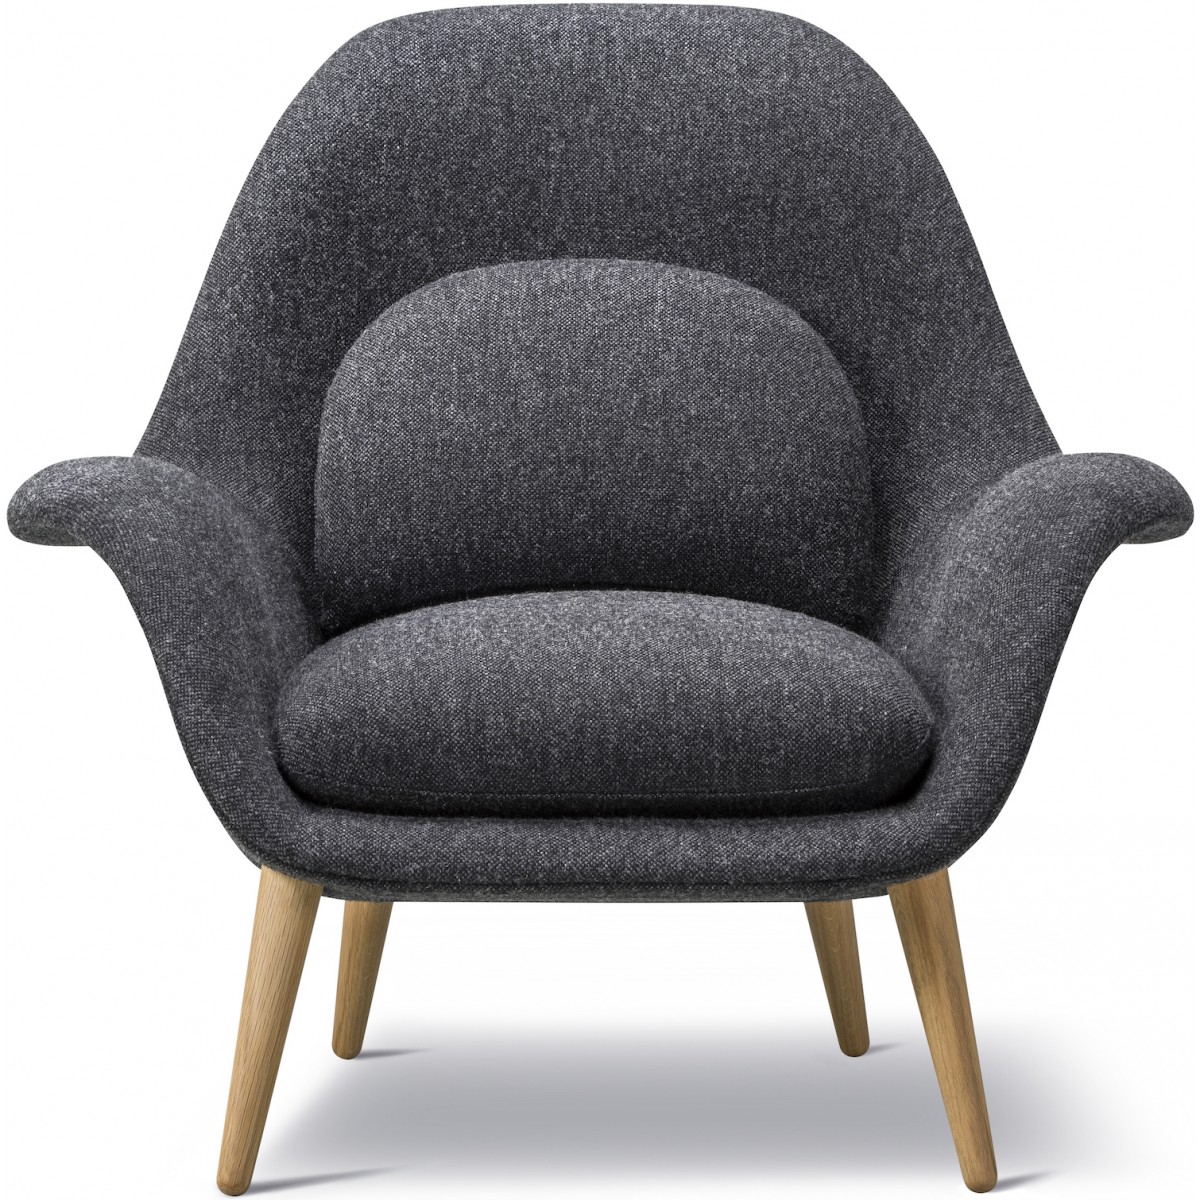 SOLD OUT Hallingdal 180 + oiled oak - Swoon lounge chair